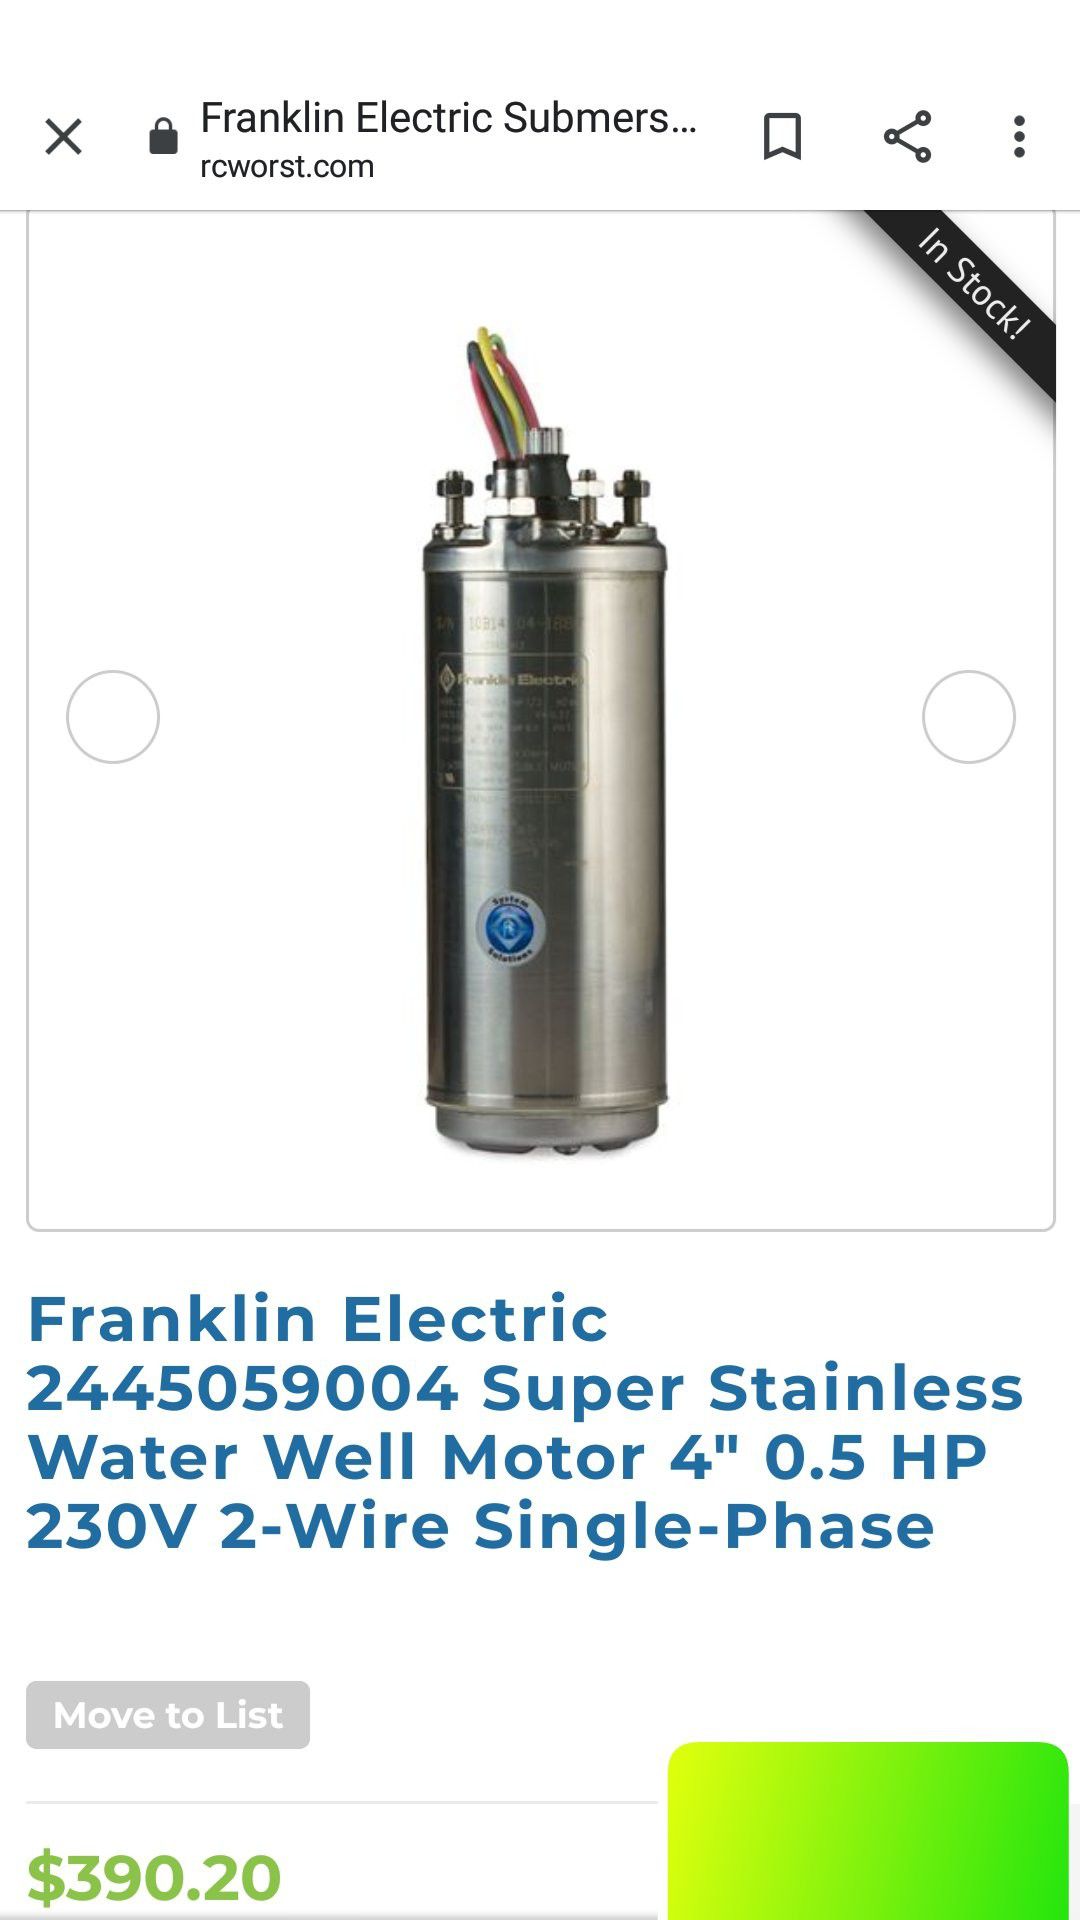 Franklin electric submersible well pump 0.5 hp